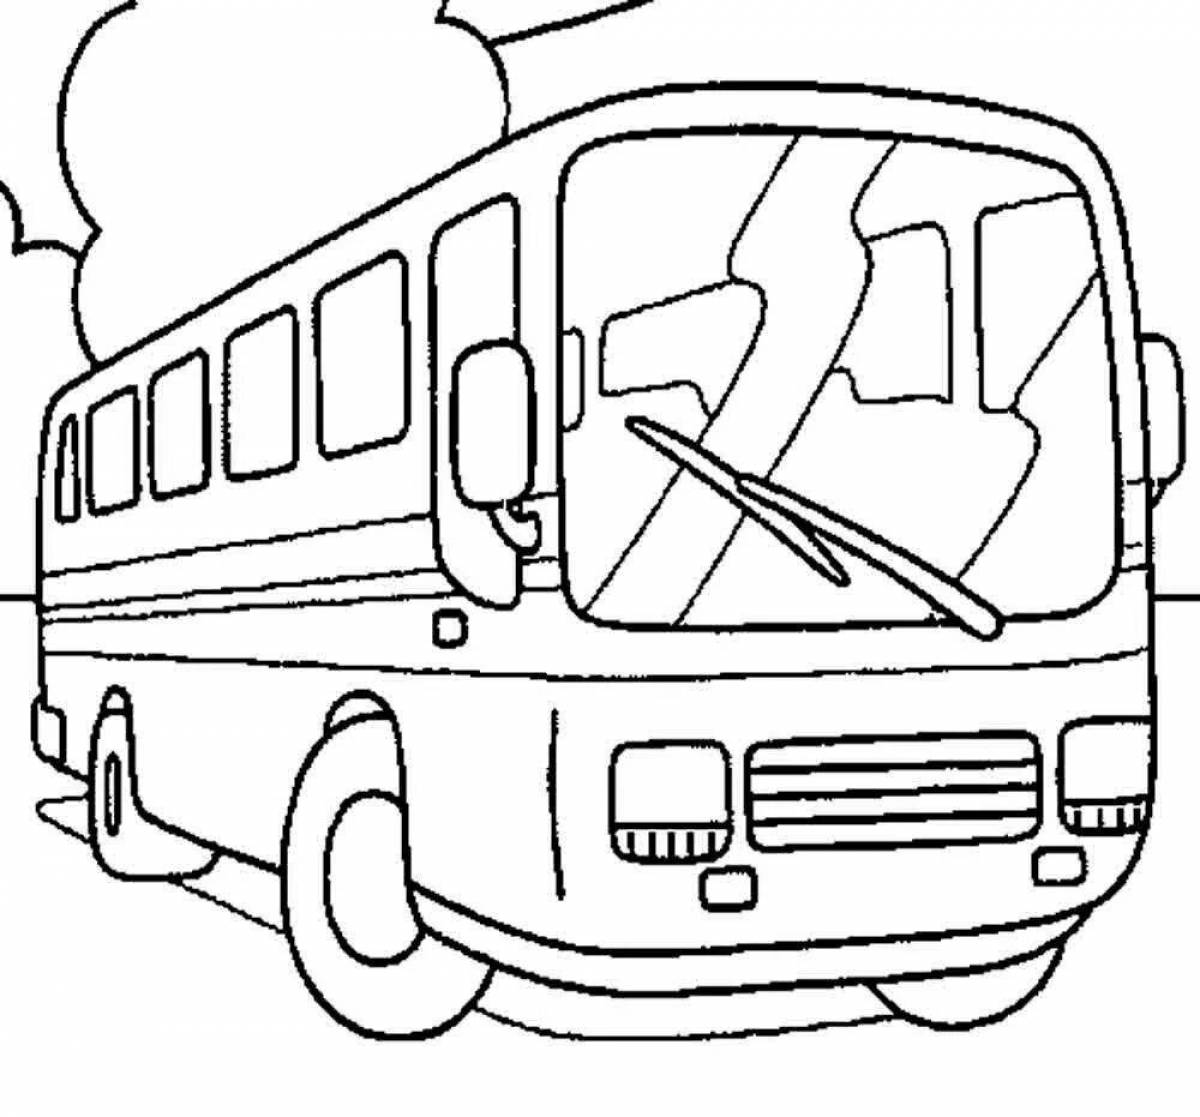 Bright bus coloring book for 5 year olds